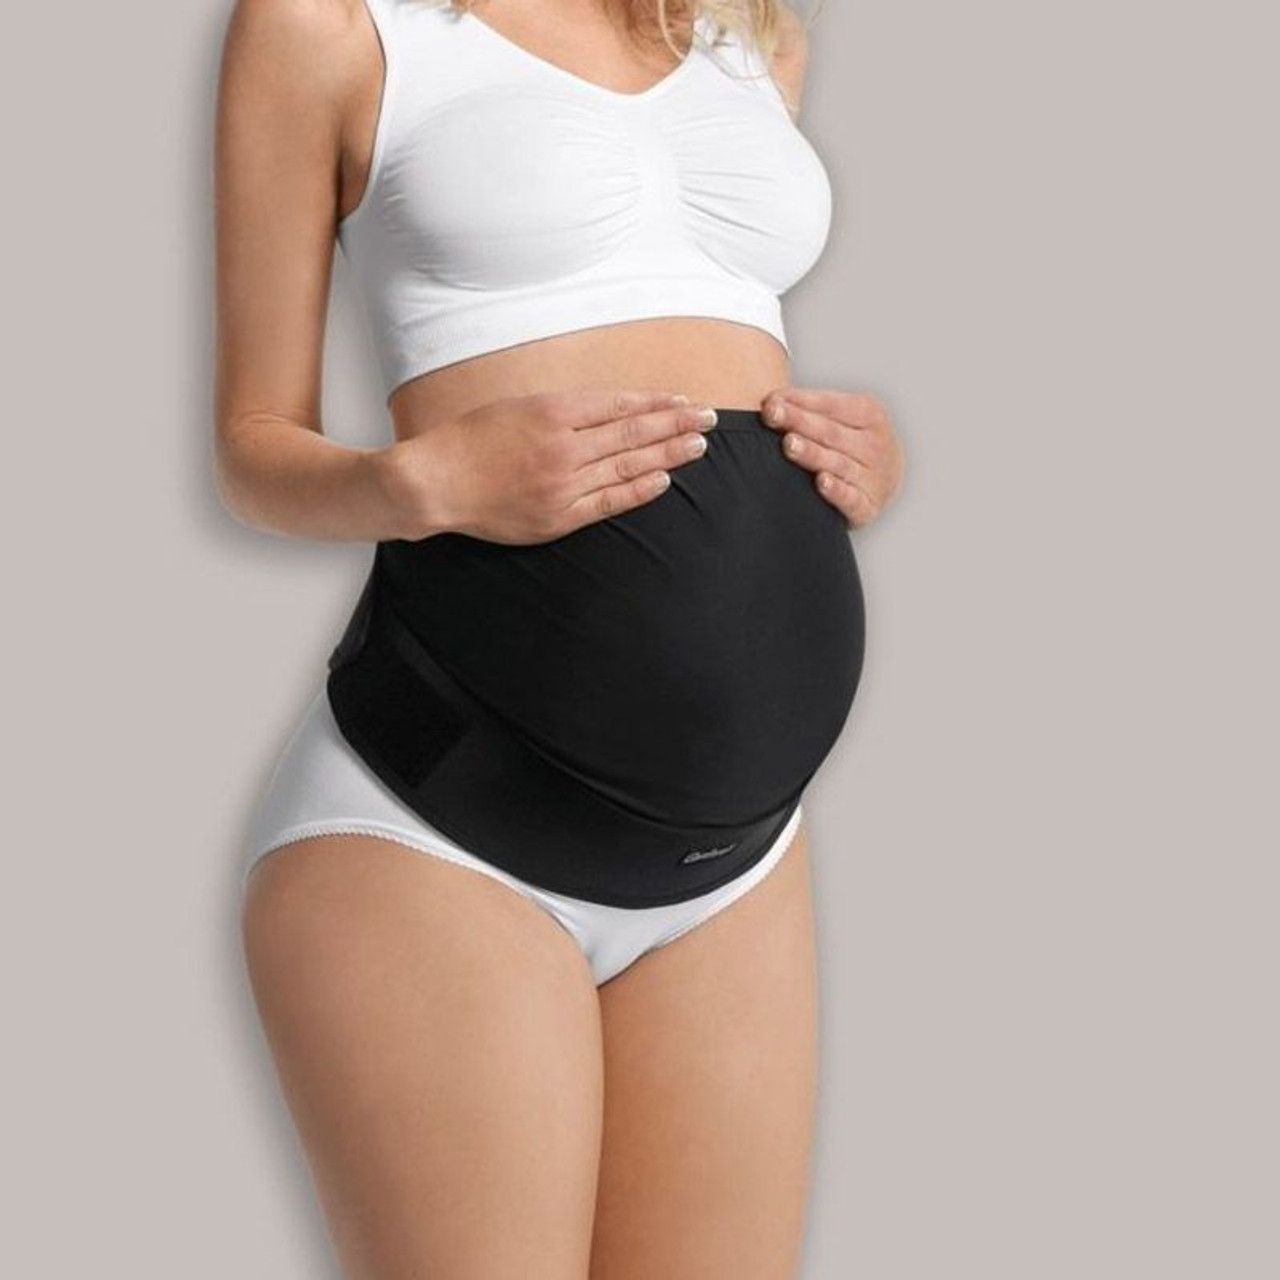 Buy Carriwell Seamless Maternity Support Band at